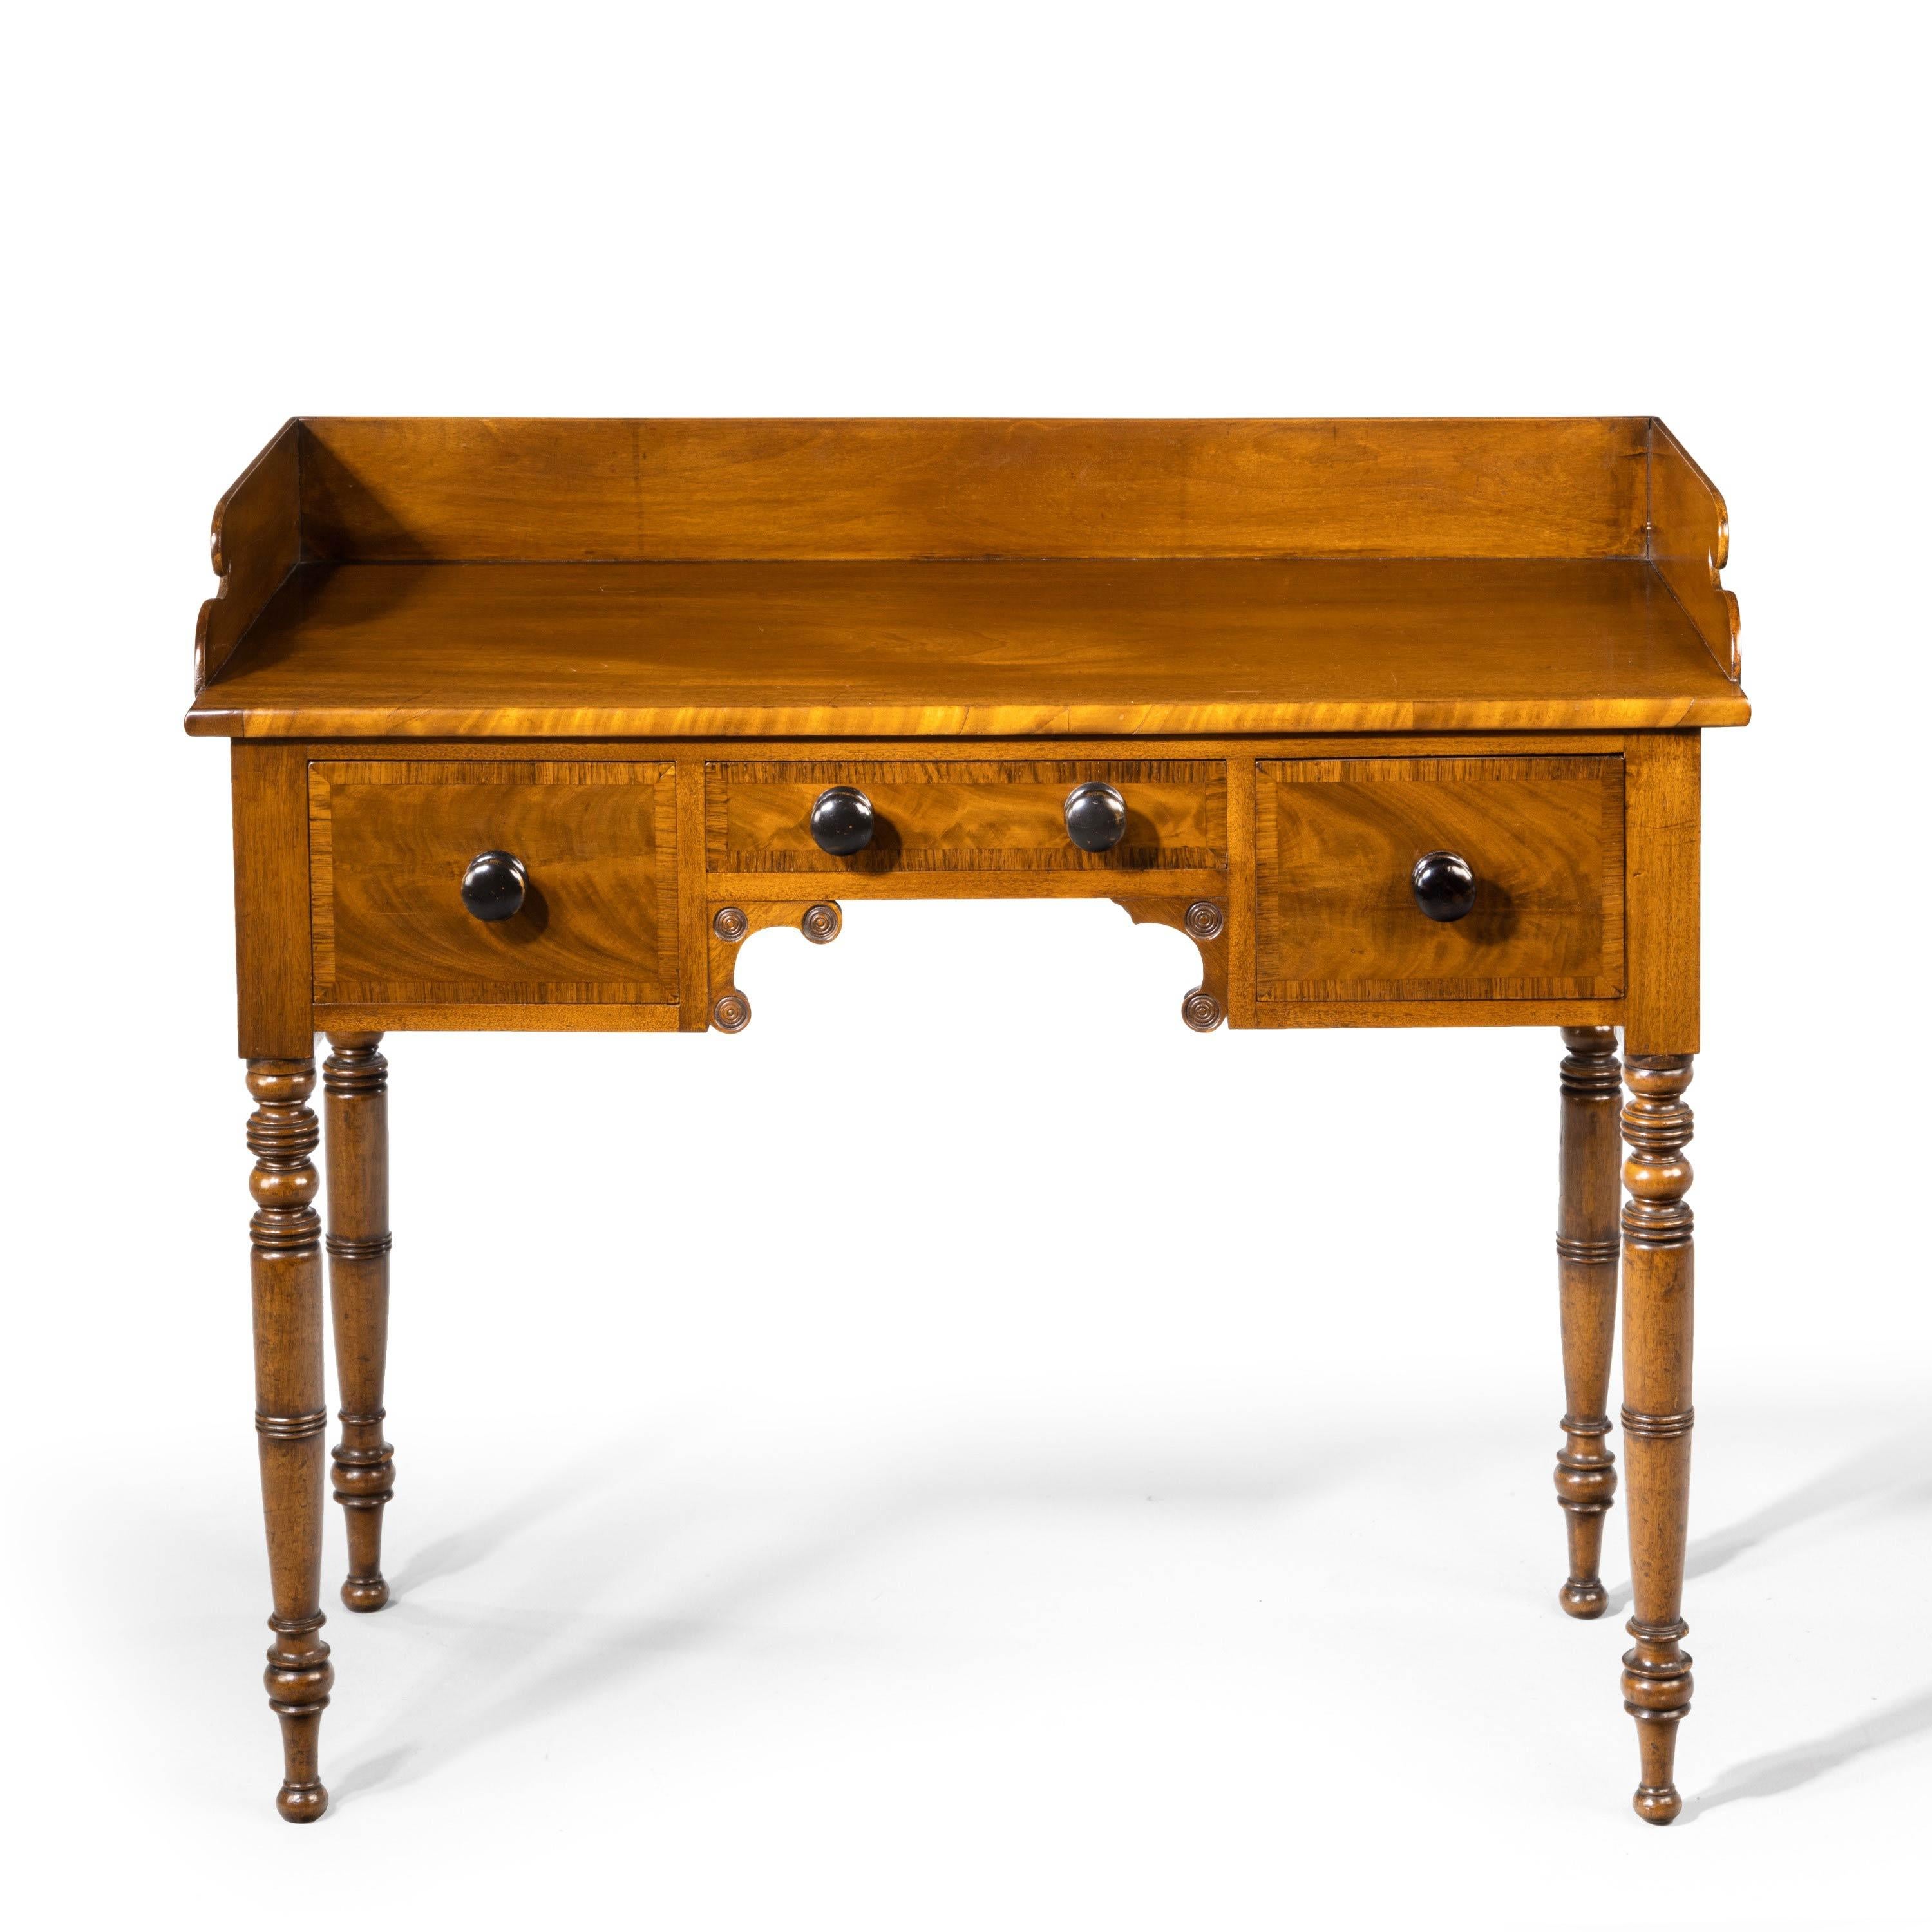 19th Century William IV Period Side or Serving Table in the Manner of Gillows